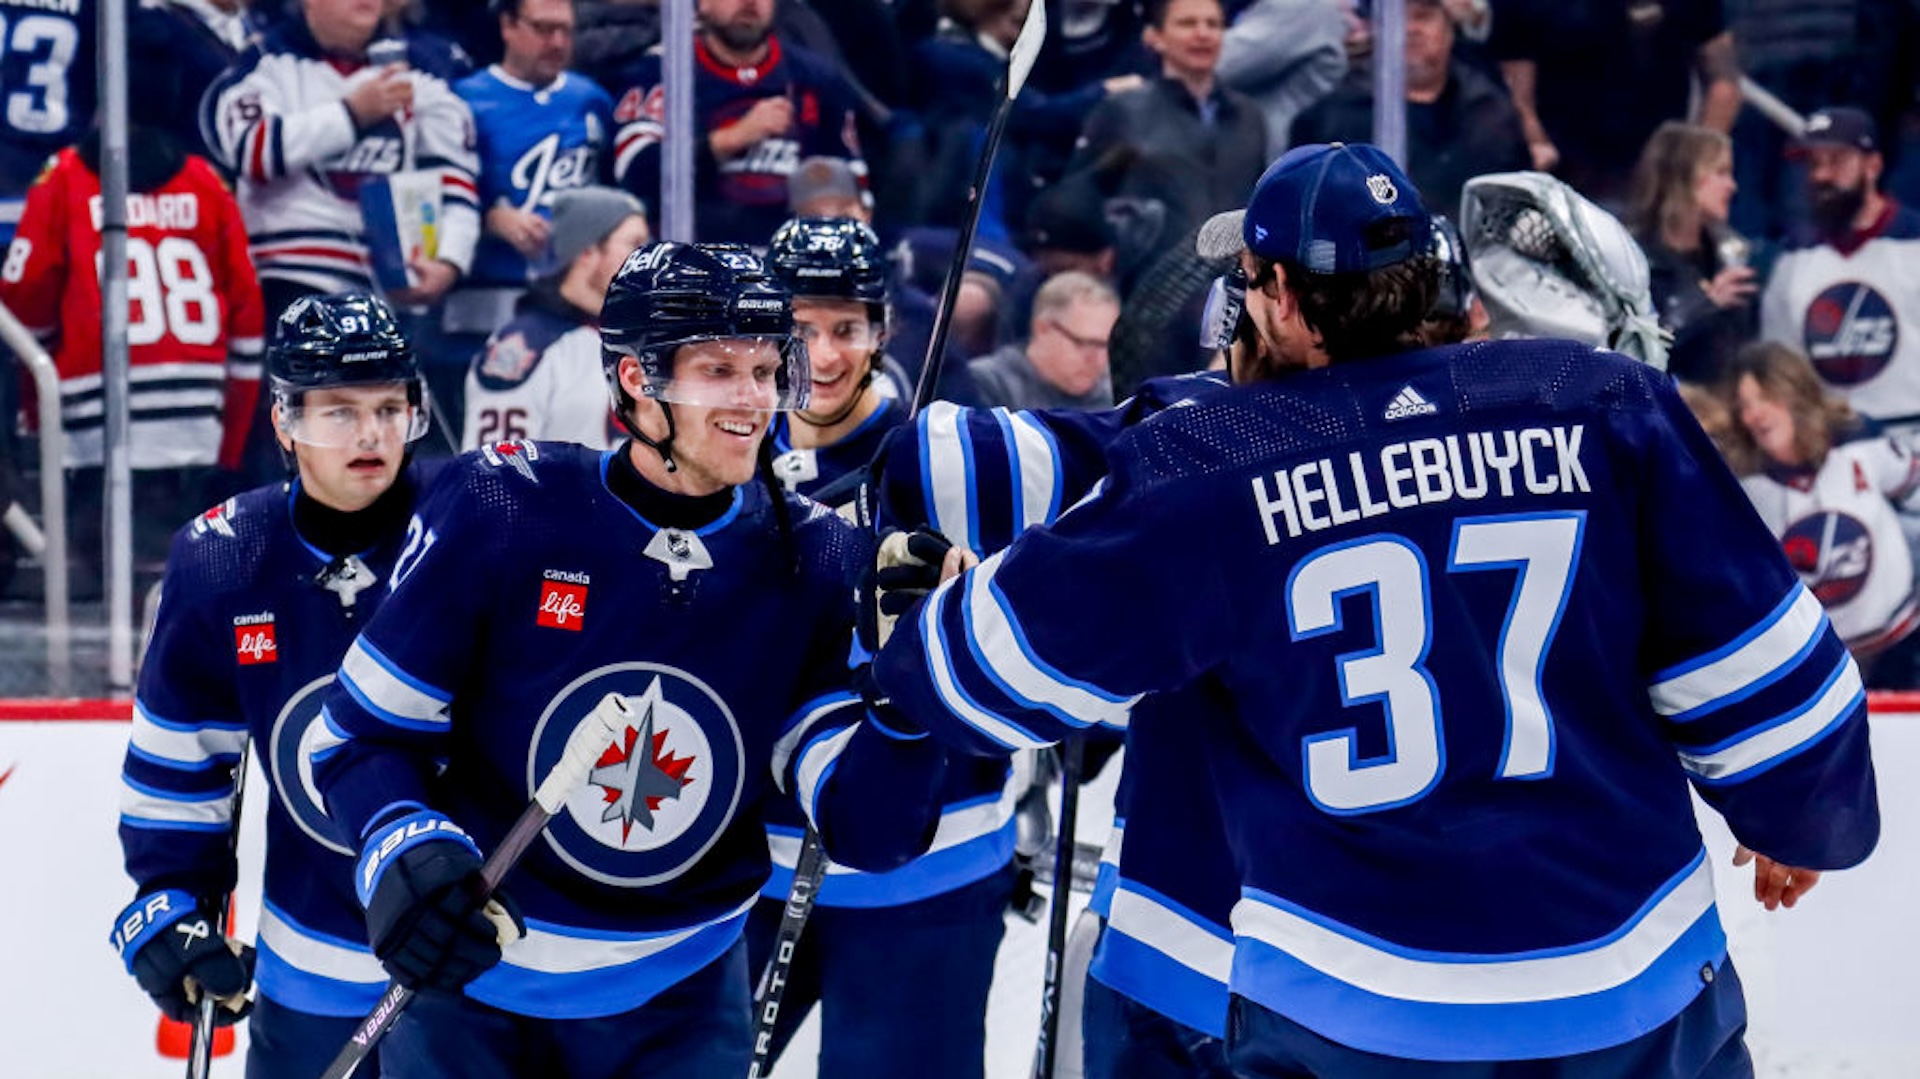 Nikolaj Ehlers #27 and goaltender Connor Hellebuyck #37 of the Winnipeg Jets celebrate with teammates following a 2-1 victory over the Chicago Blackhawks at the Canada Life Centre on January 11, 2024 in Winnipeg, Manitoba, Canada.